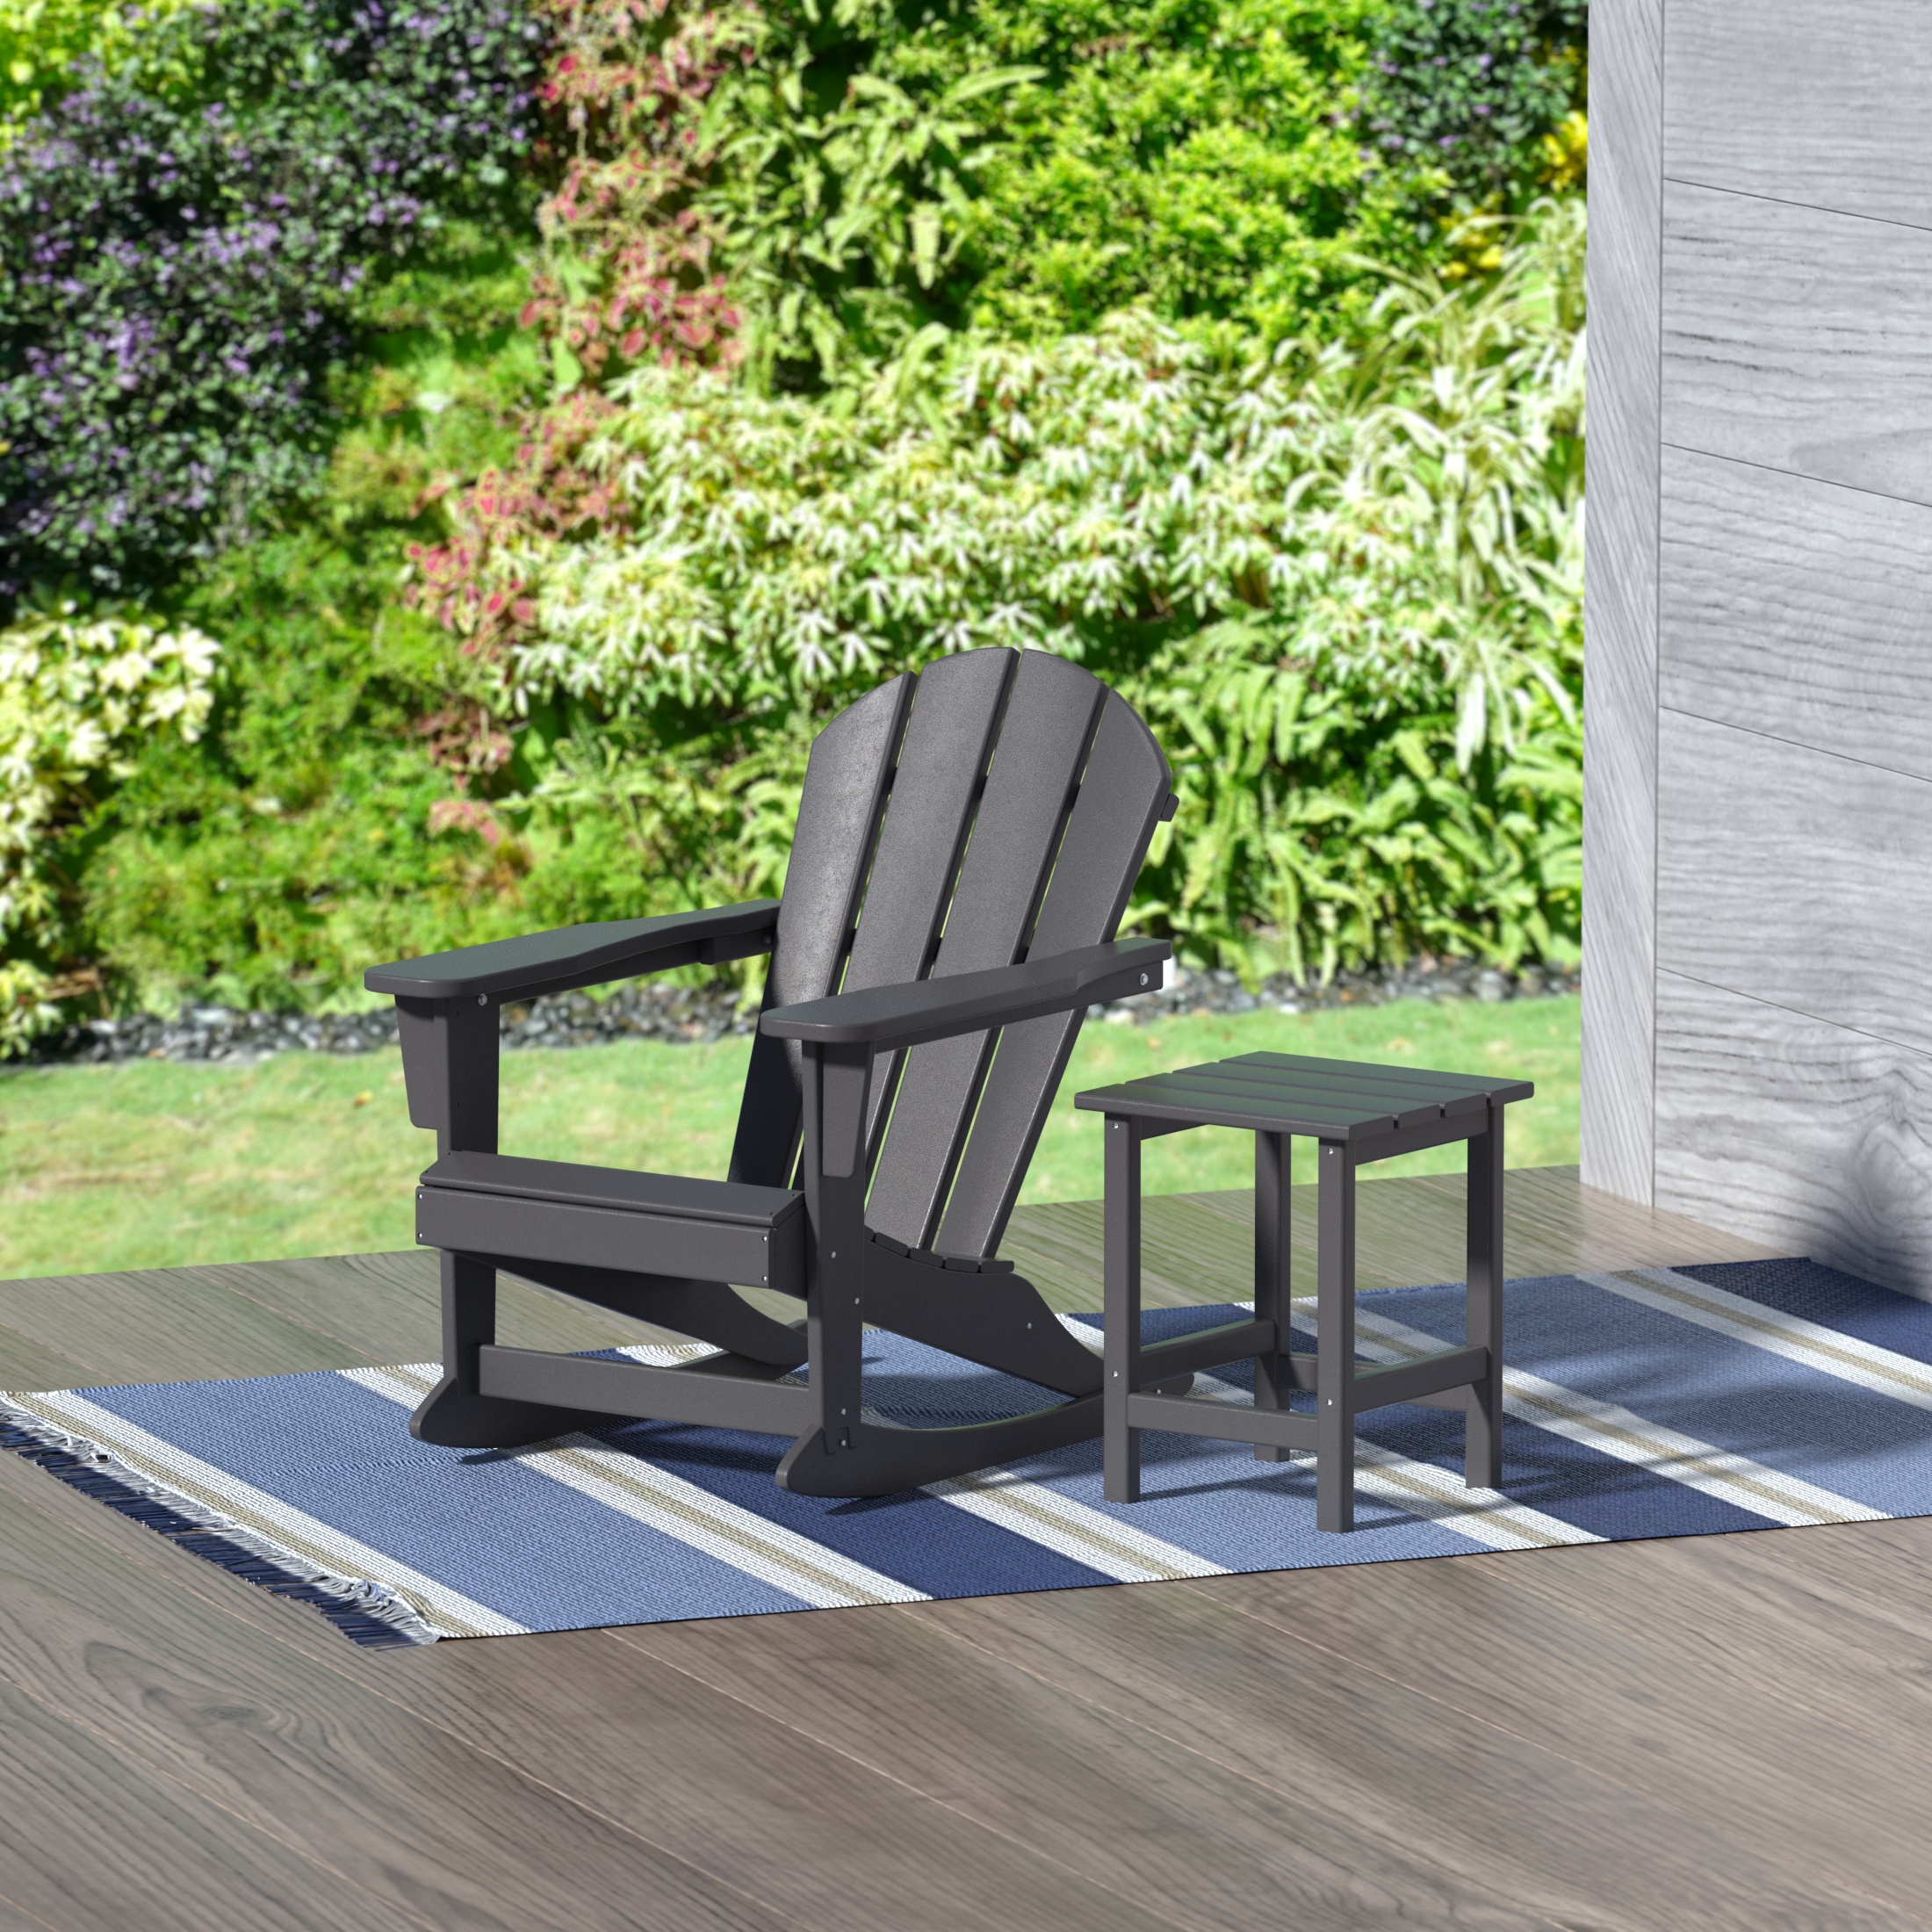 GARDEN 2-Piece Set Plastic Outdoor Rocking Chair with Square Side Table Included, Gray - image 1 of 11